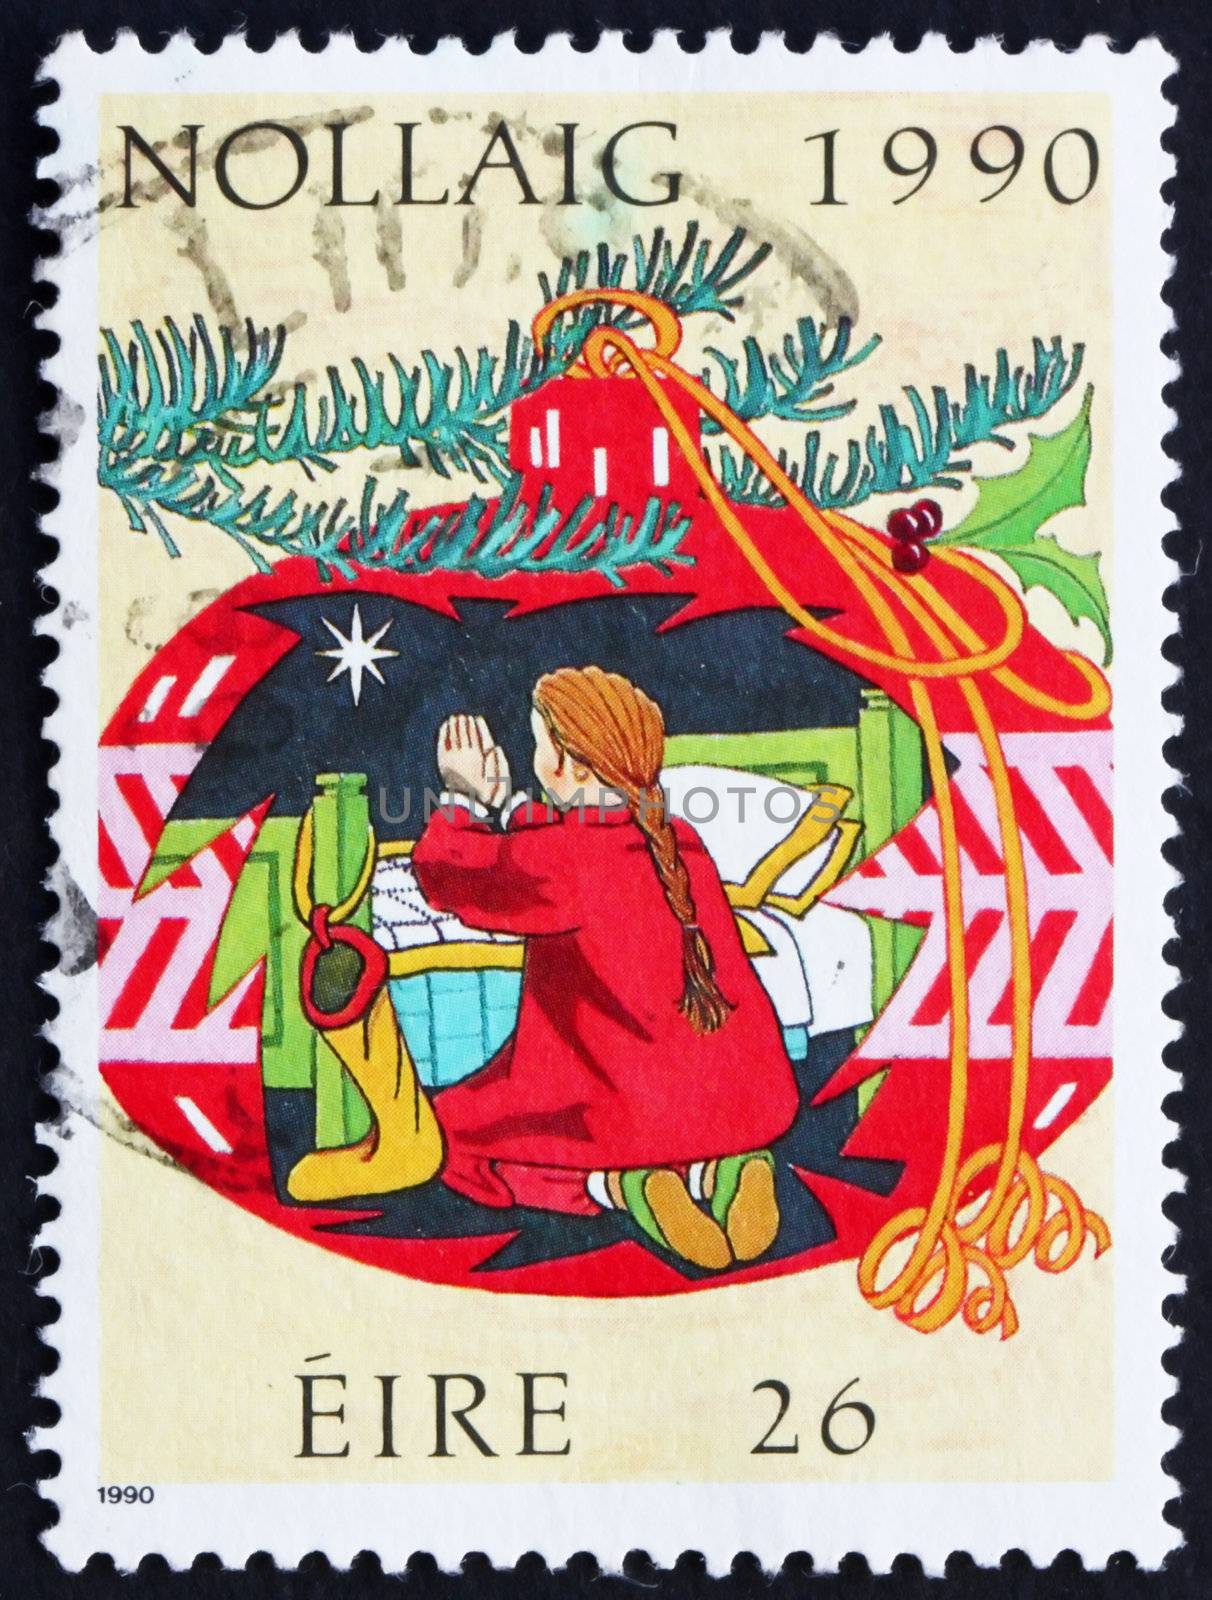 IRELAND - CIRCA 1990: a stamp printed in the Ireland shows Child Praying in a Christmas Decoration, Christmas, circa 1990